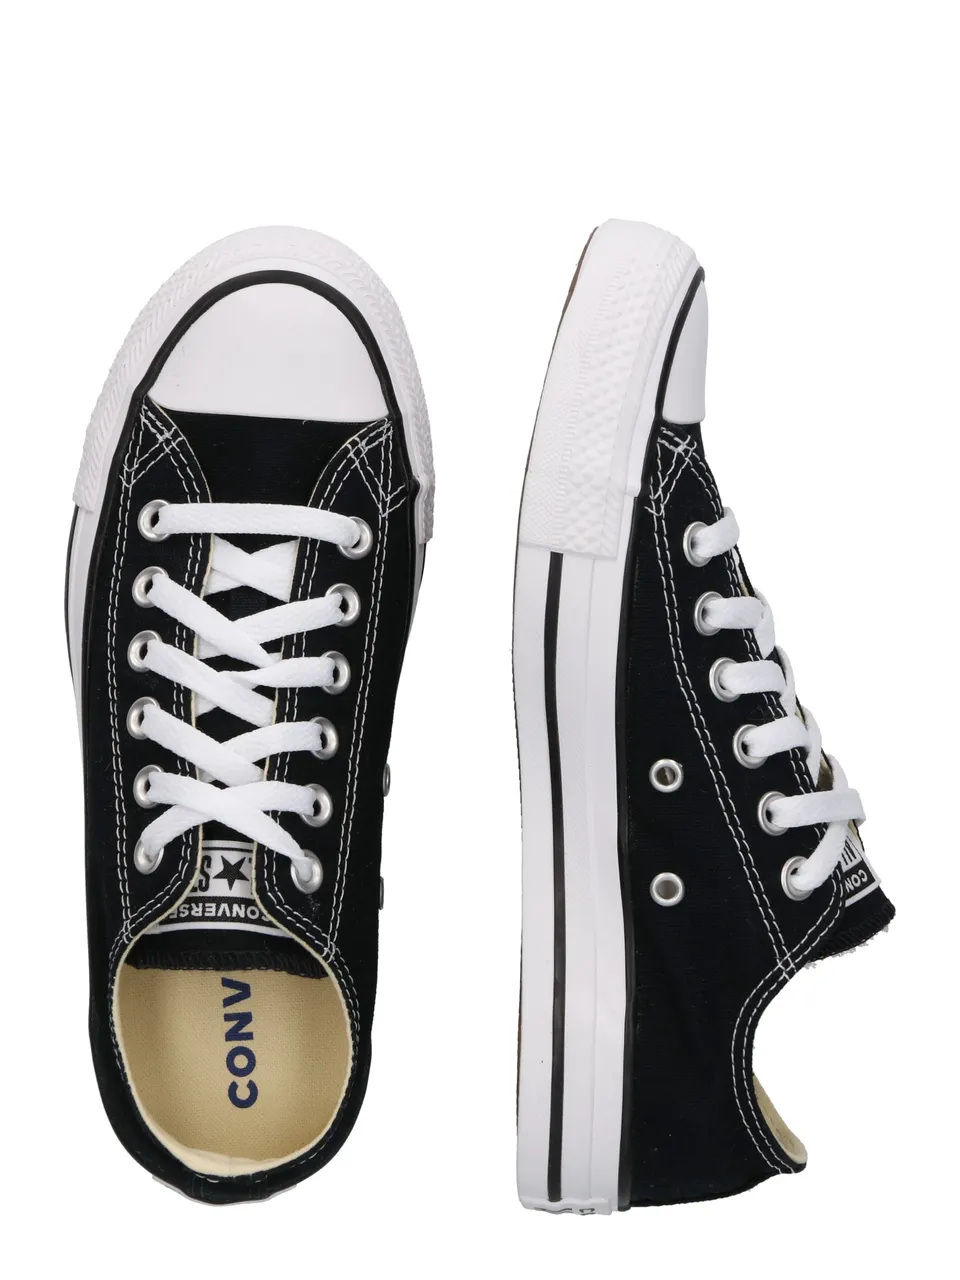 Sneakers laag 'Chuck Taylor All Star Wide'